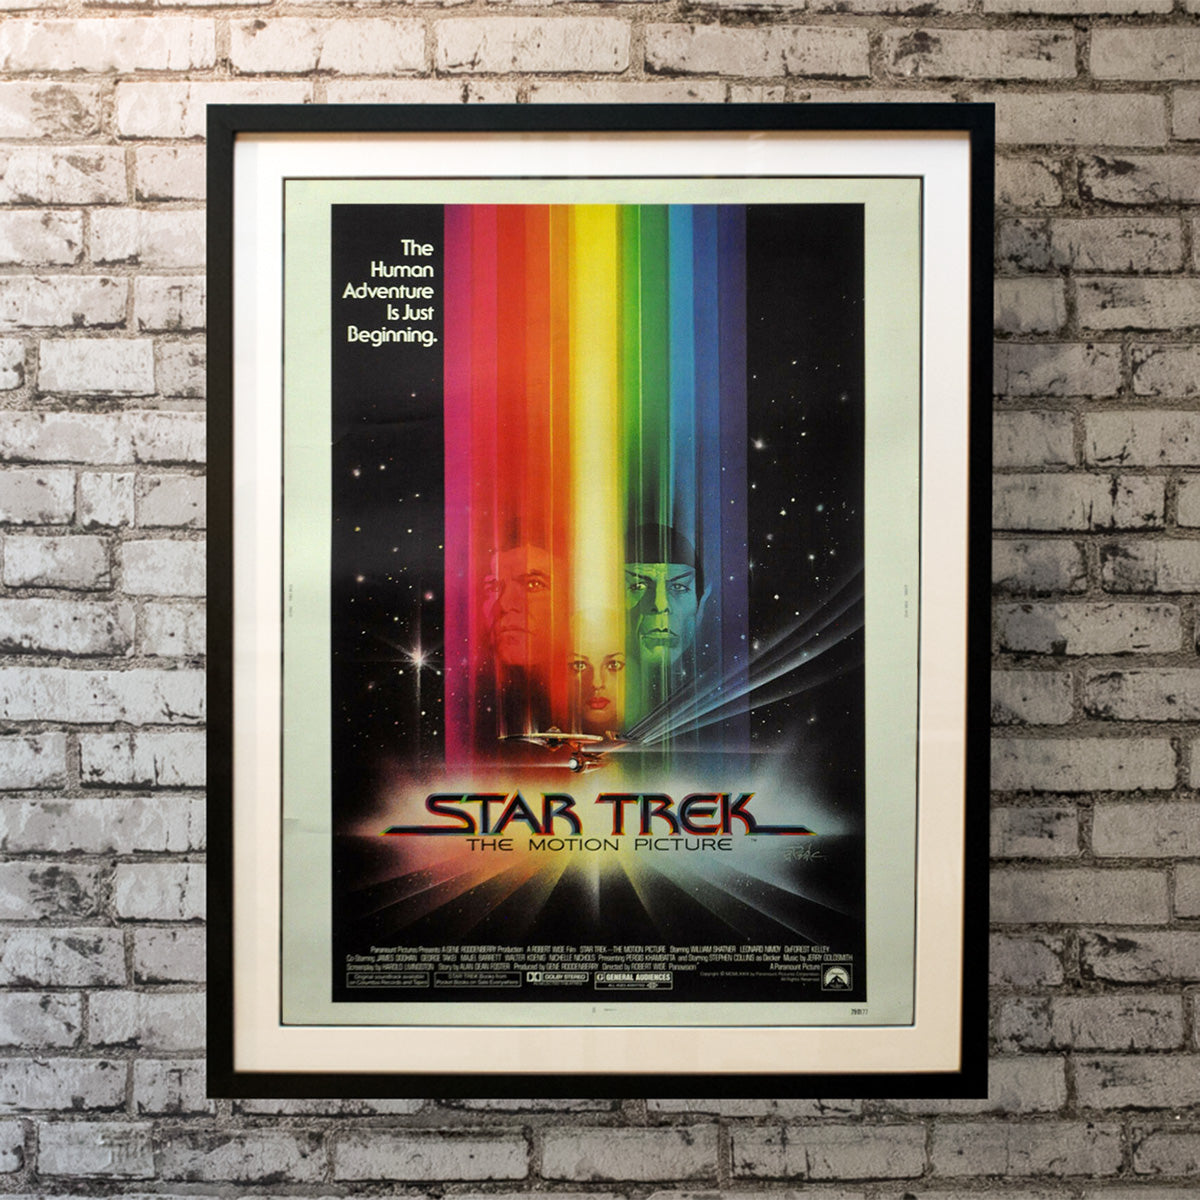 Original Movie Poster of Star Trek: The Motion Picture (1979)